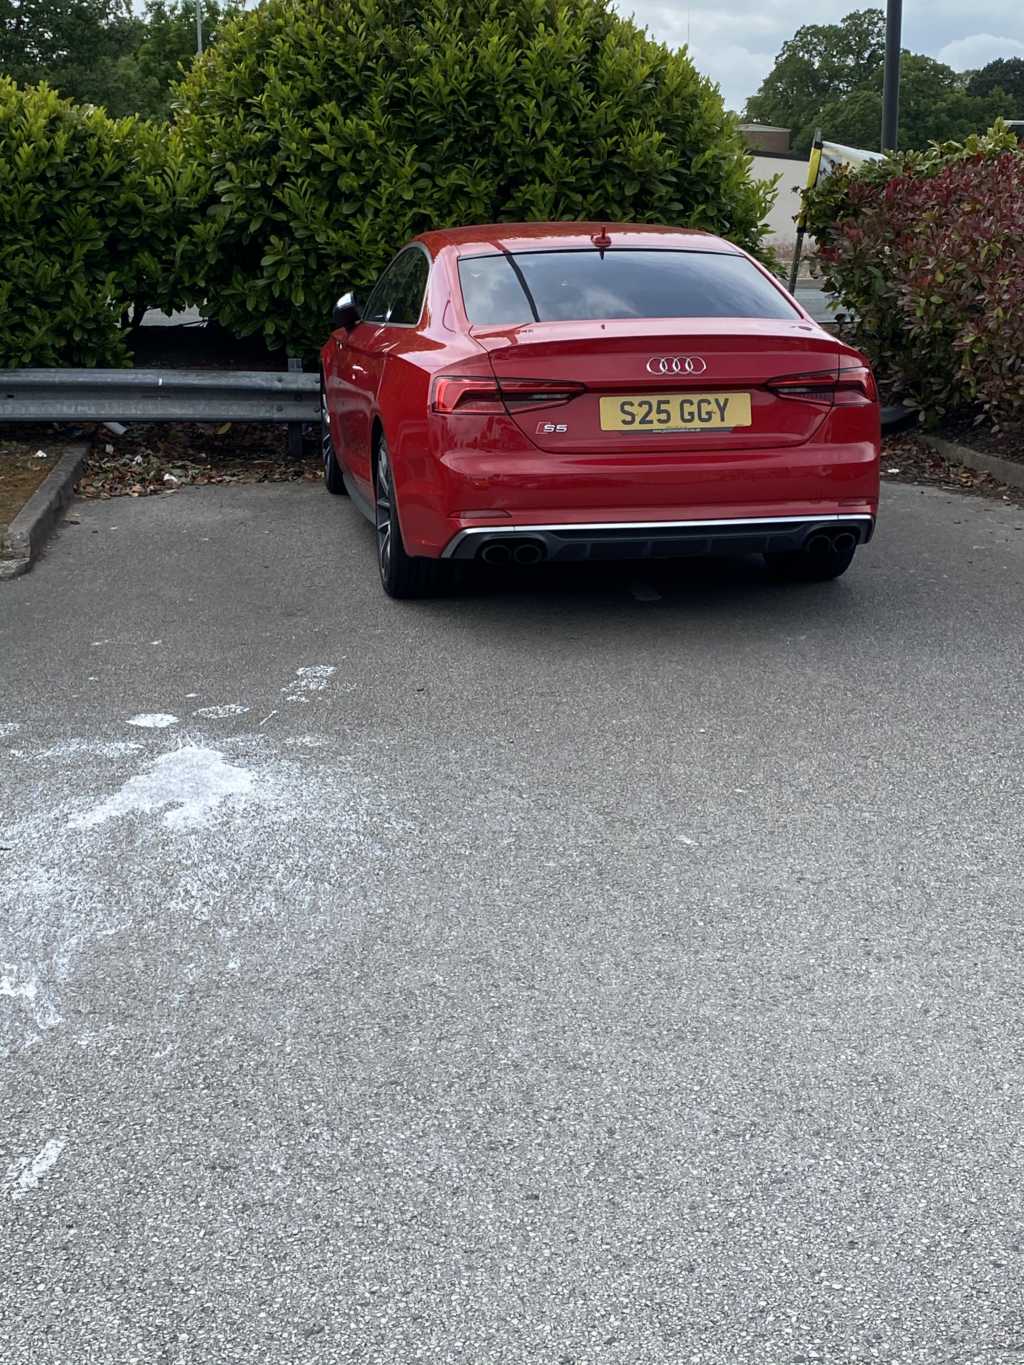 S25 GGY displaying Inconsiderate Parking